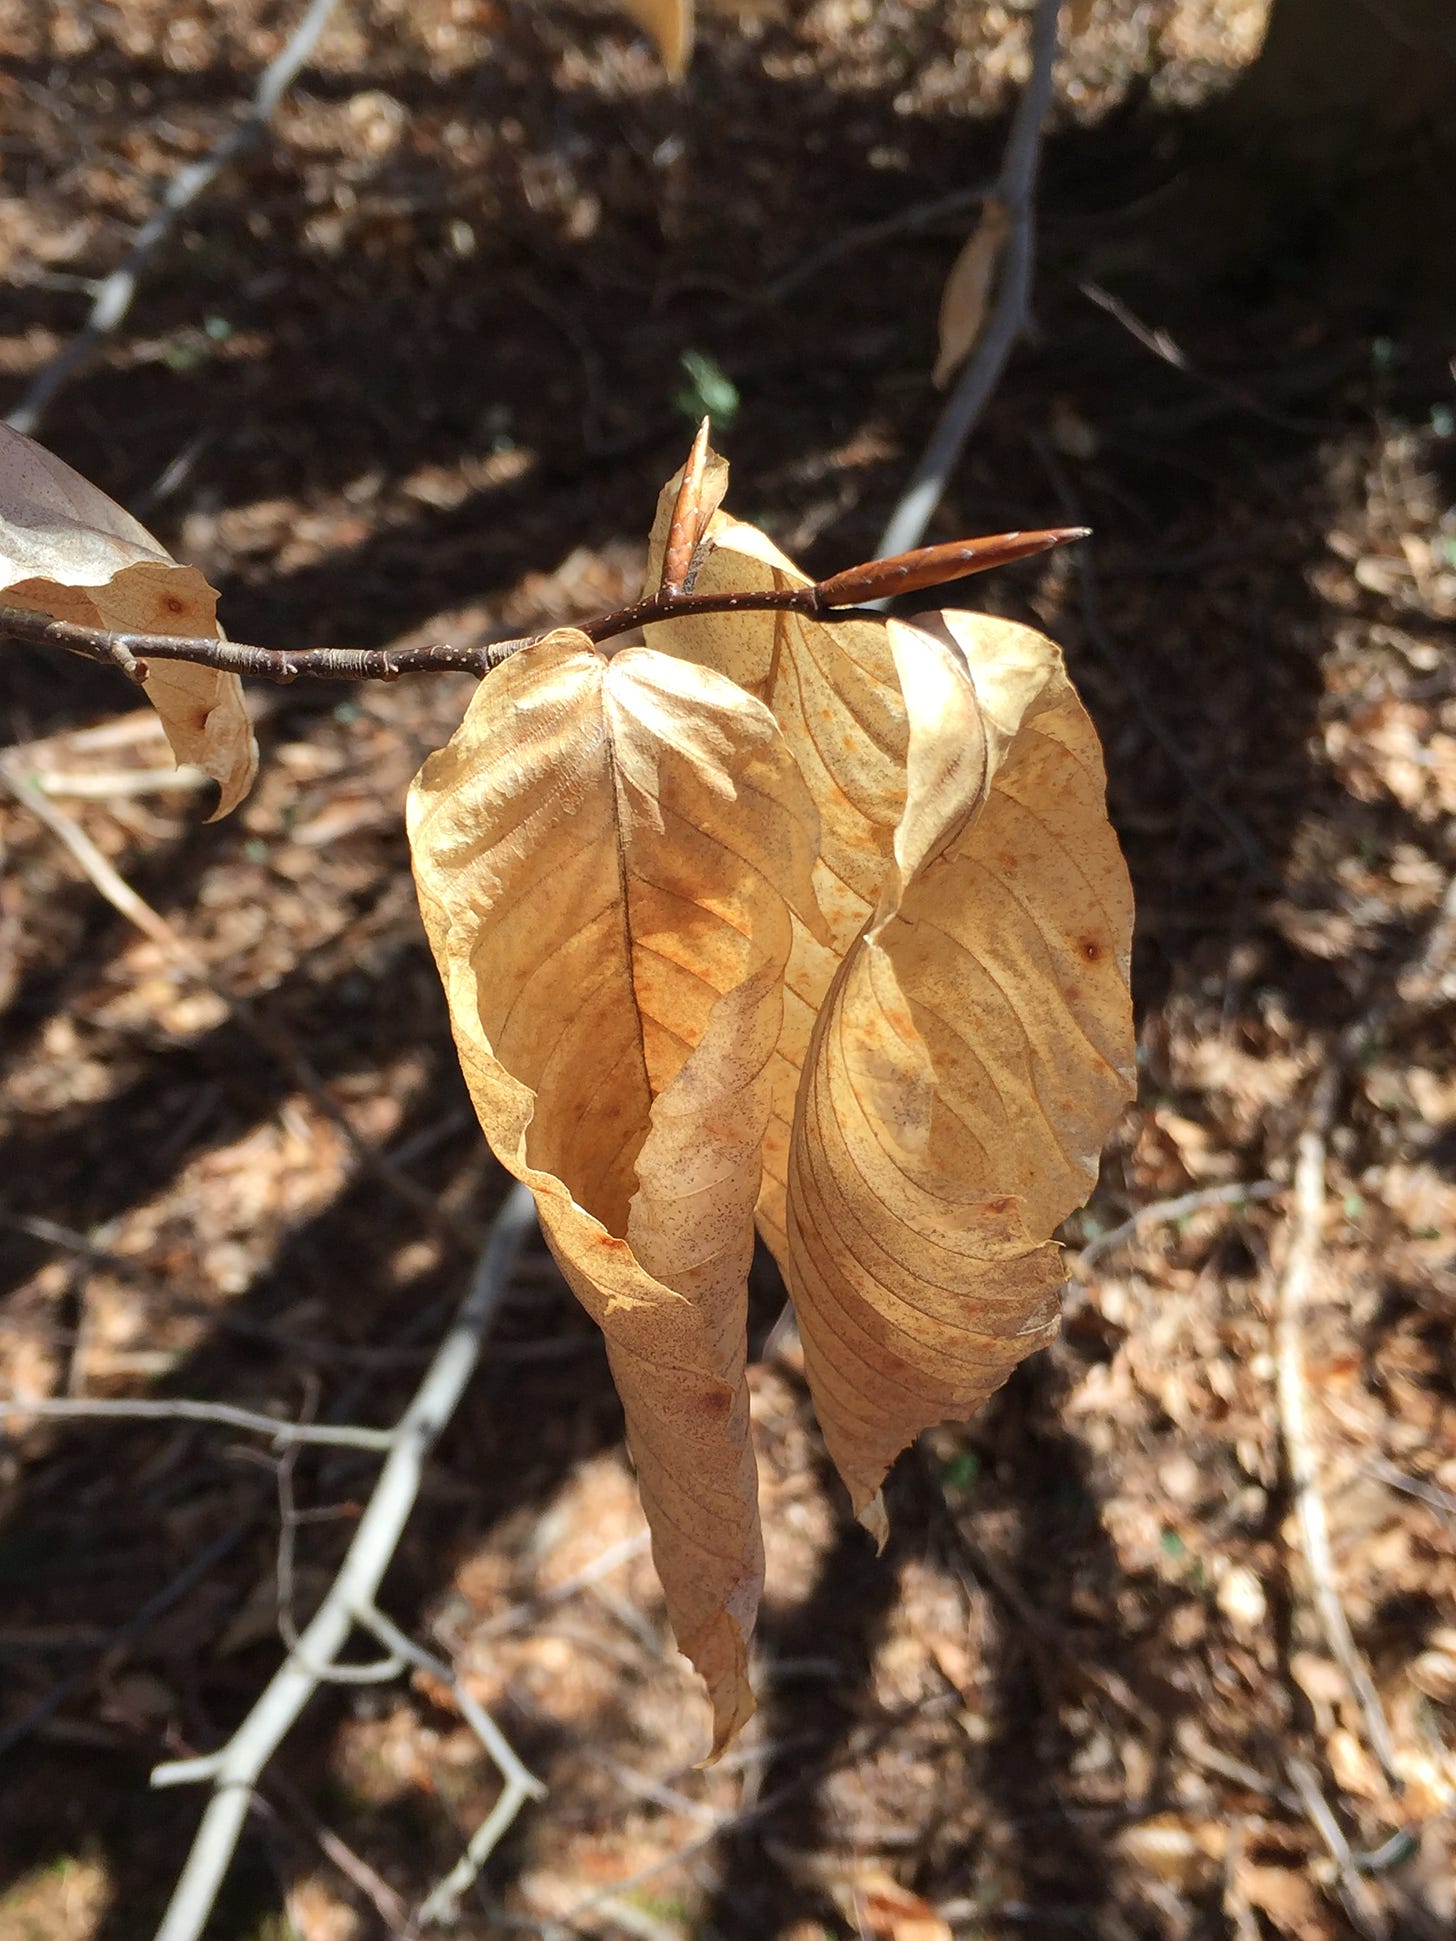 A closeup photo of dead and withered beech leaves still hanging on the stems but with new growth about the unfurl at the points of attachment